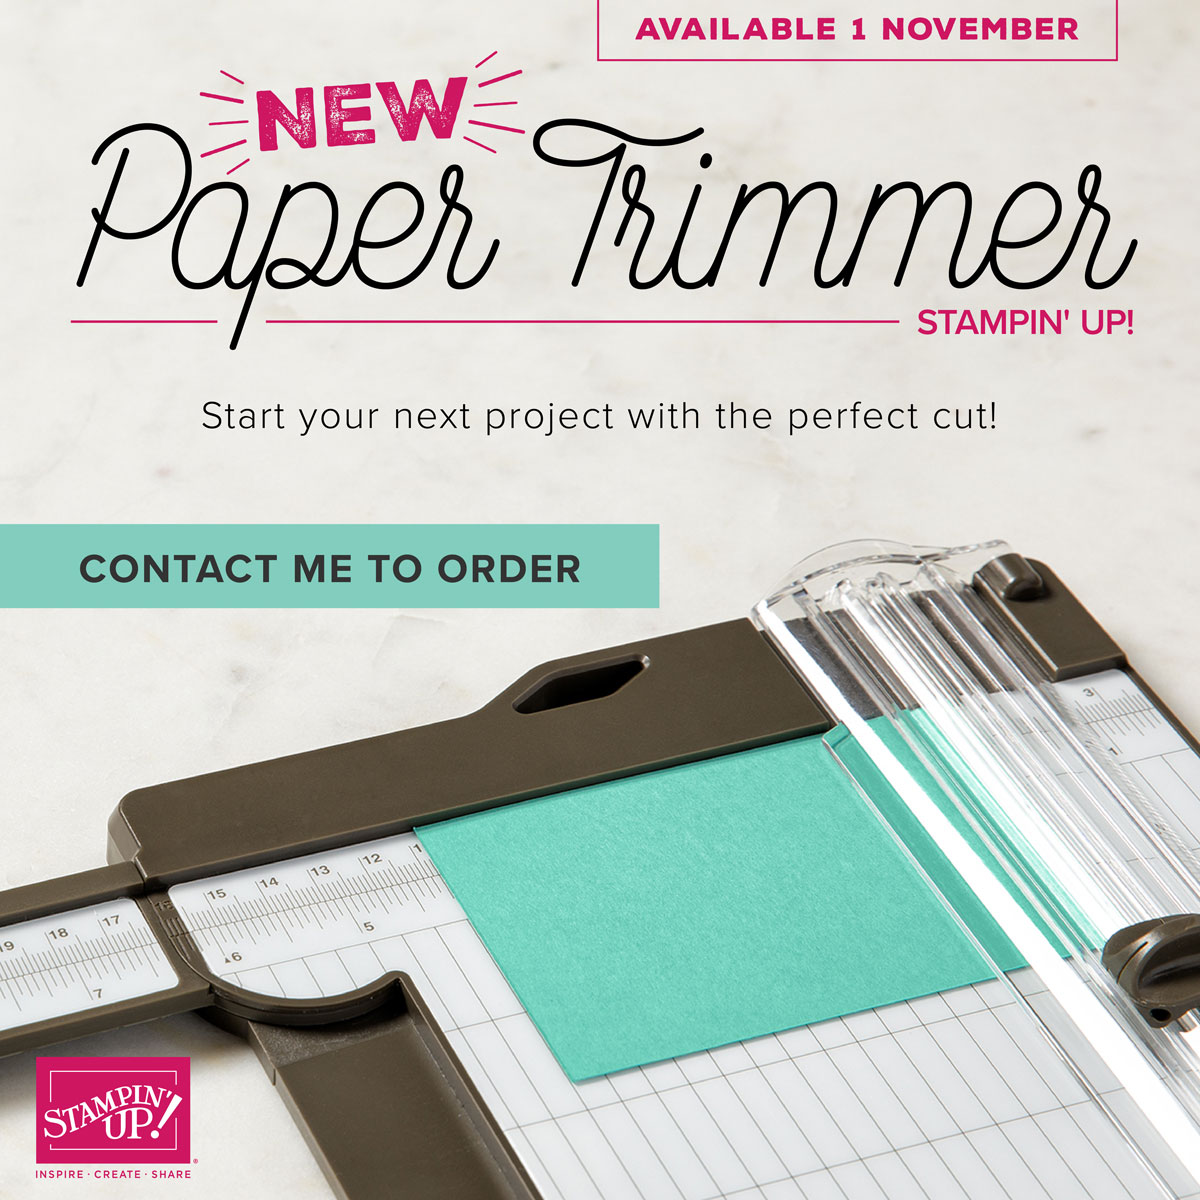 The new Stampin' Up! Trimmer is now available!